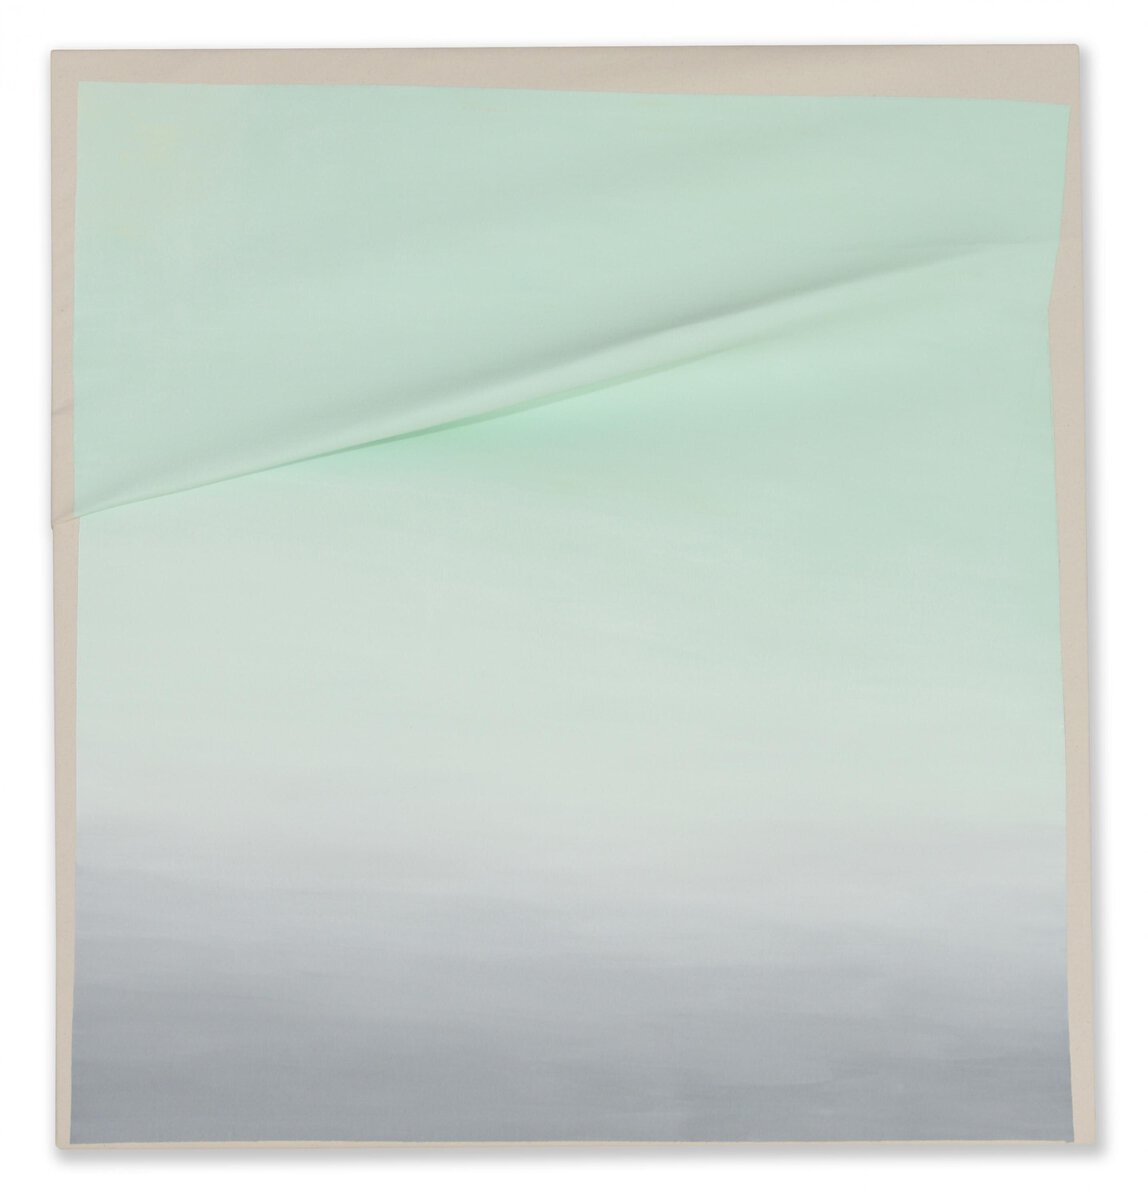 Jean Alexander Frater; Green to Grey Fold; 2017